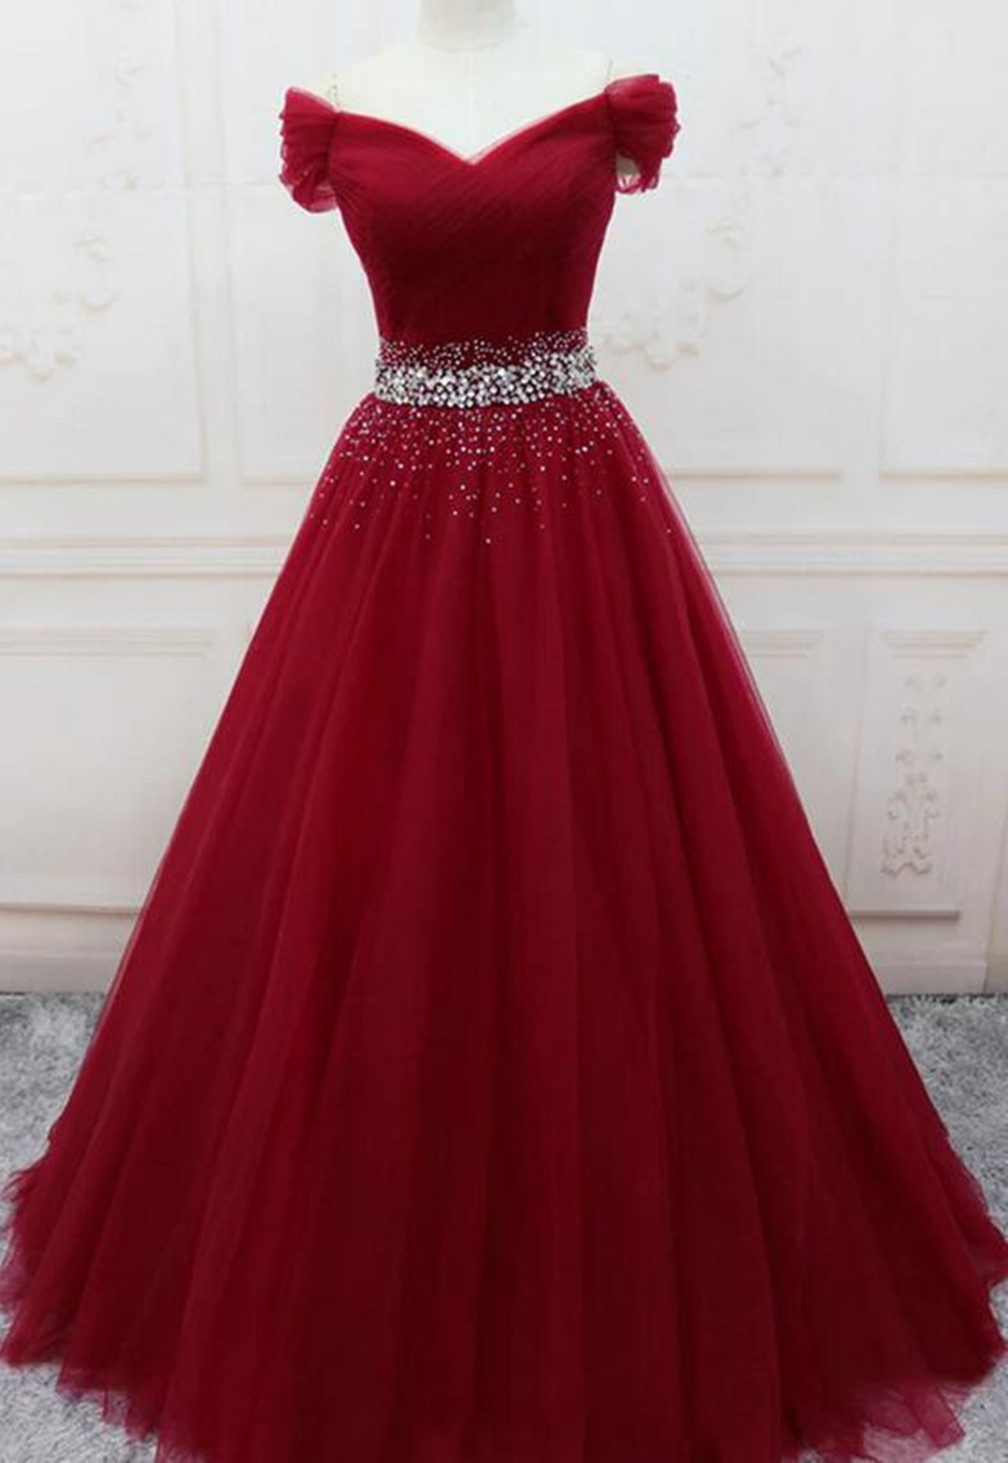 Women V-neck Tulle Beaded Prom Dresses Long A-line Beading Evening Party Gowns Sleeveless Formal Dress Yp041